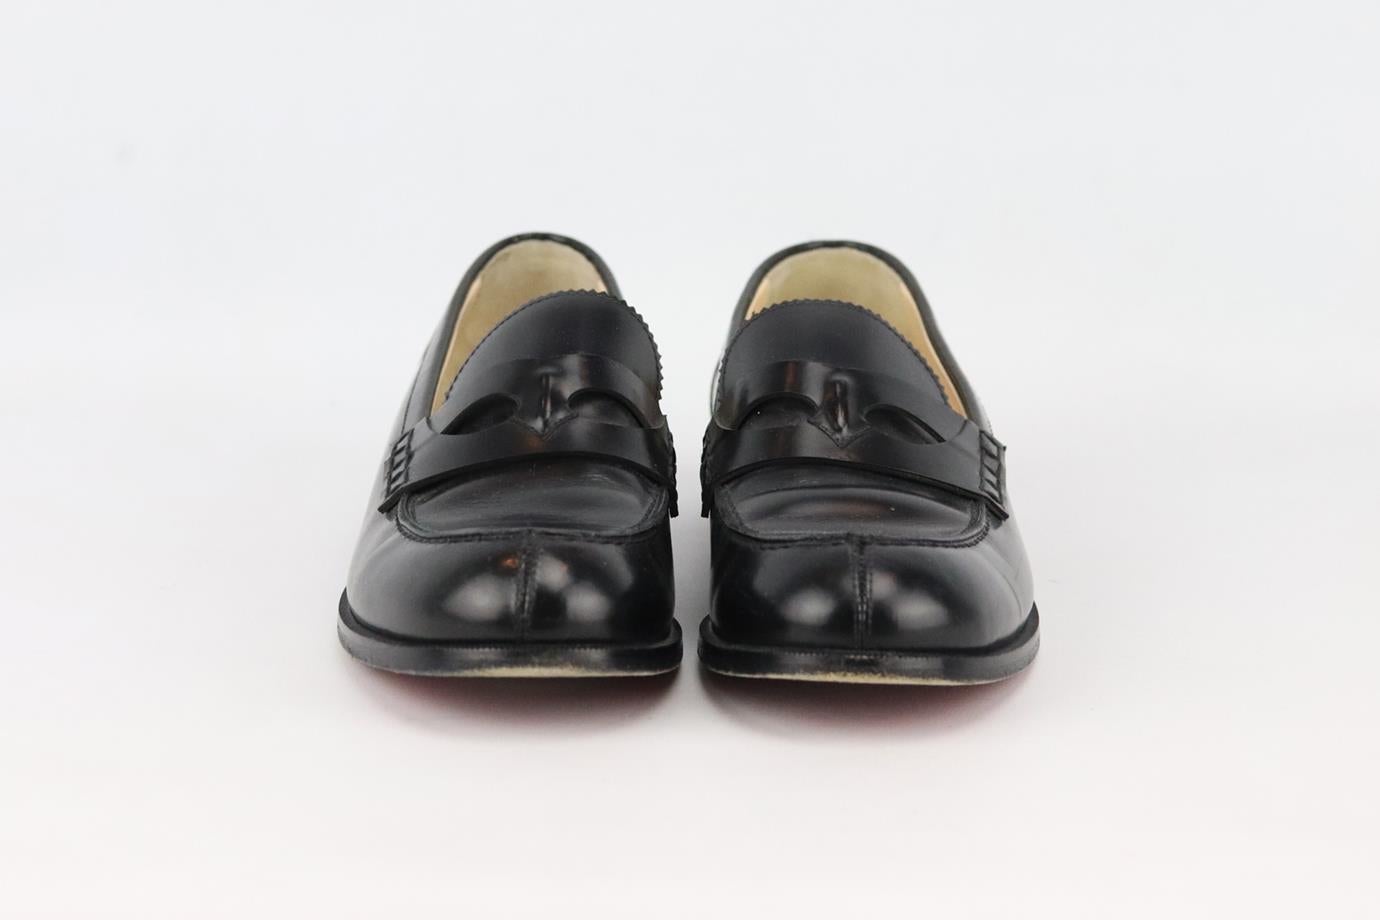 Christian Louboutin leather loafers. Made from black leather in a classic loafer shape set on the brand's iconic red sole. Black. Slips on. Does not come with box or dustbag. Size: EU 37.5 (UK 4.5, US 7.5). Insole: 9.8 in. Heel: 0.6 in